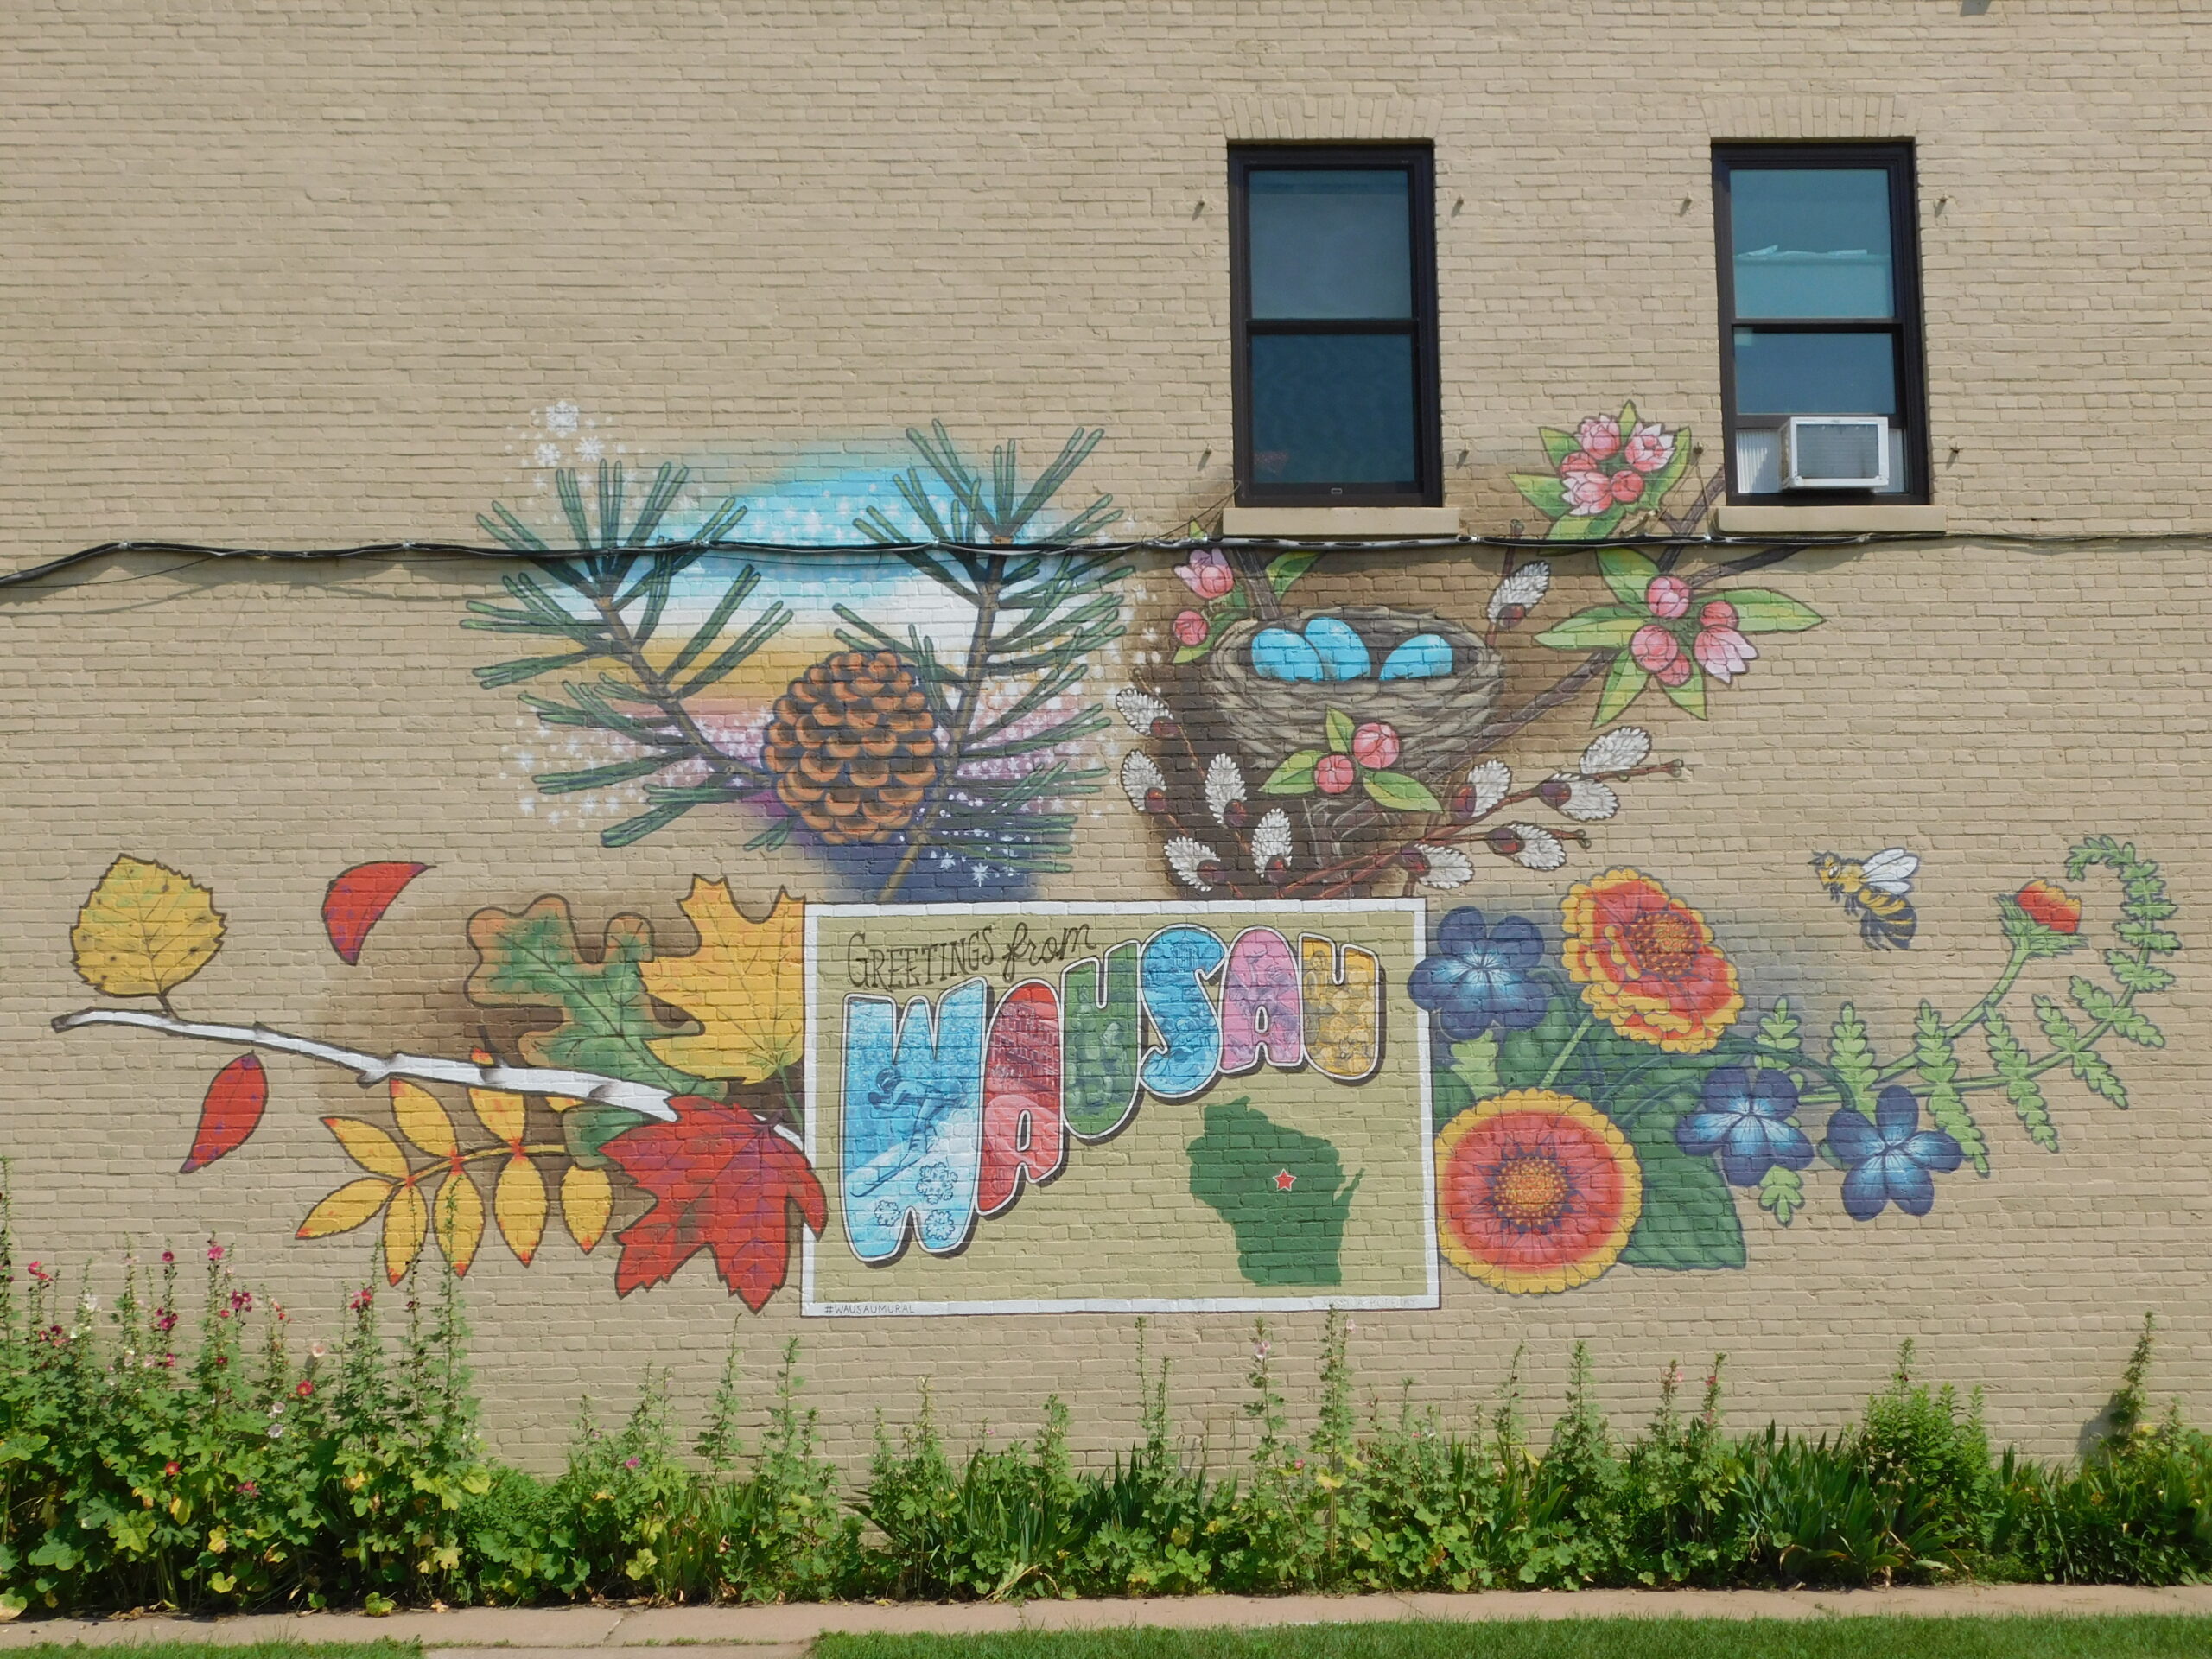 Building mural with leaves, flowers